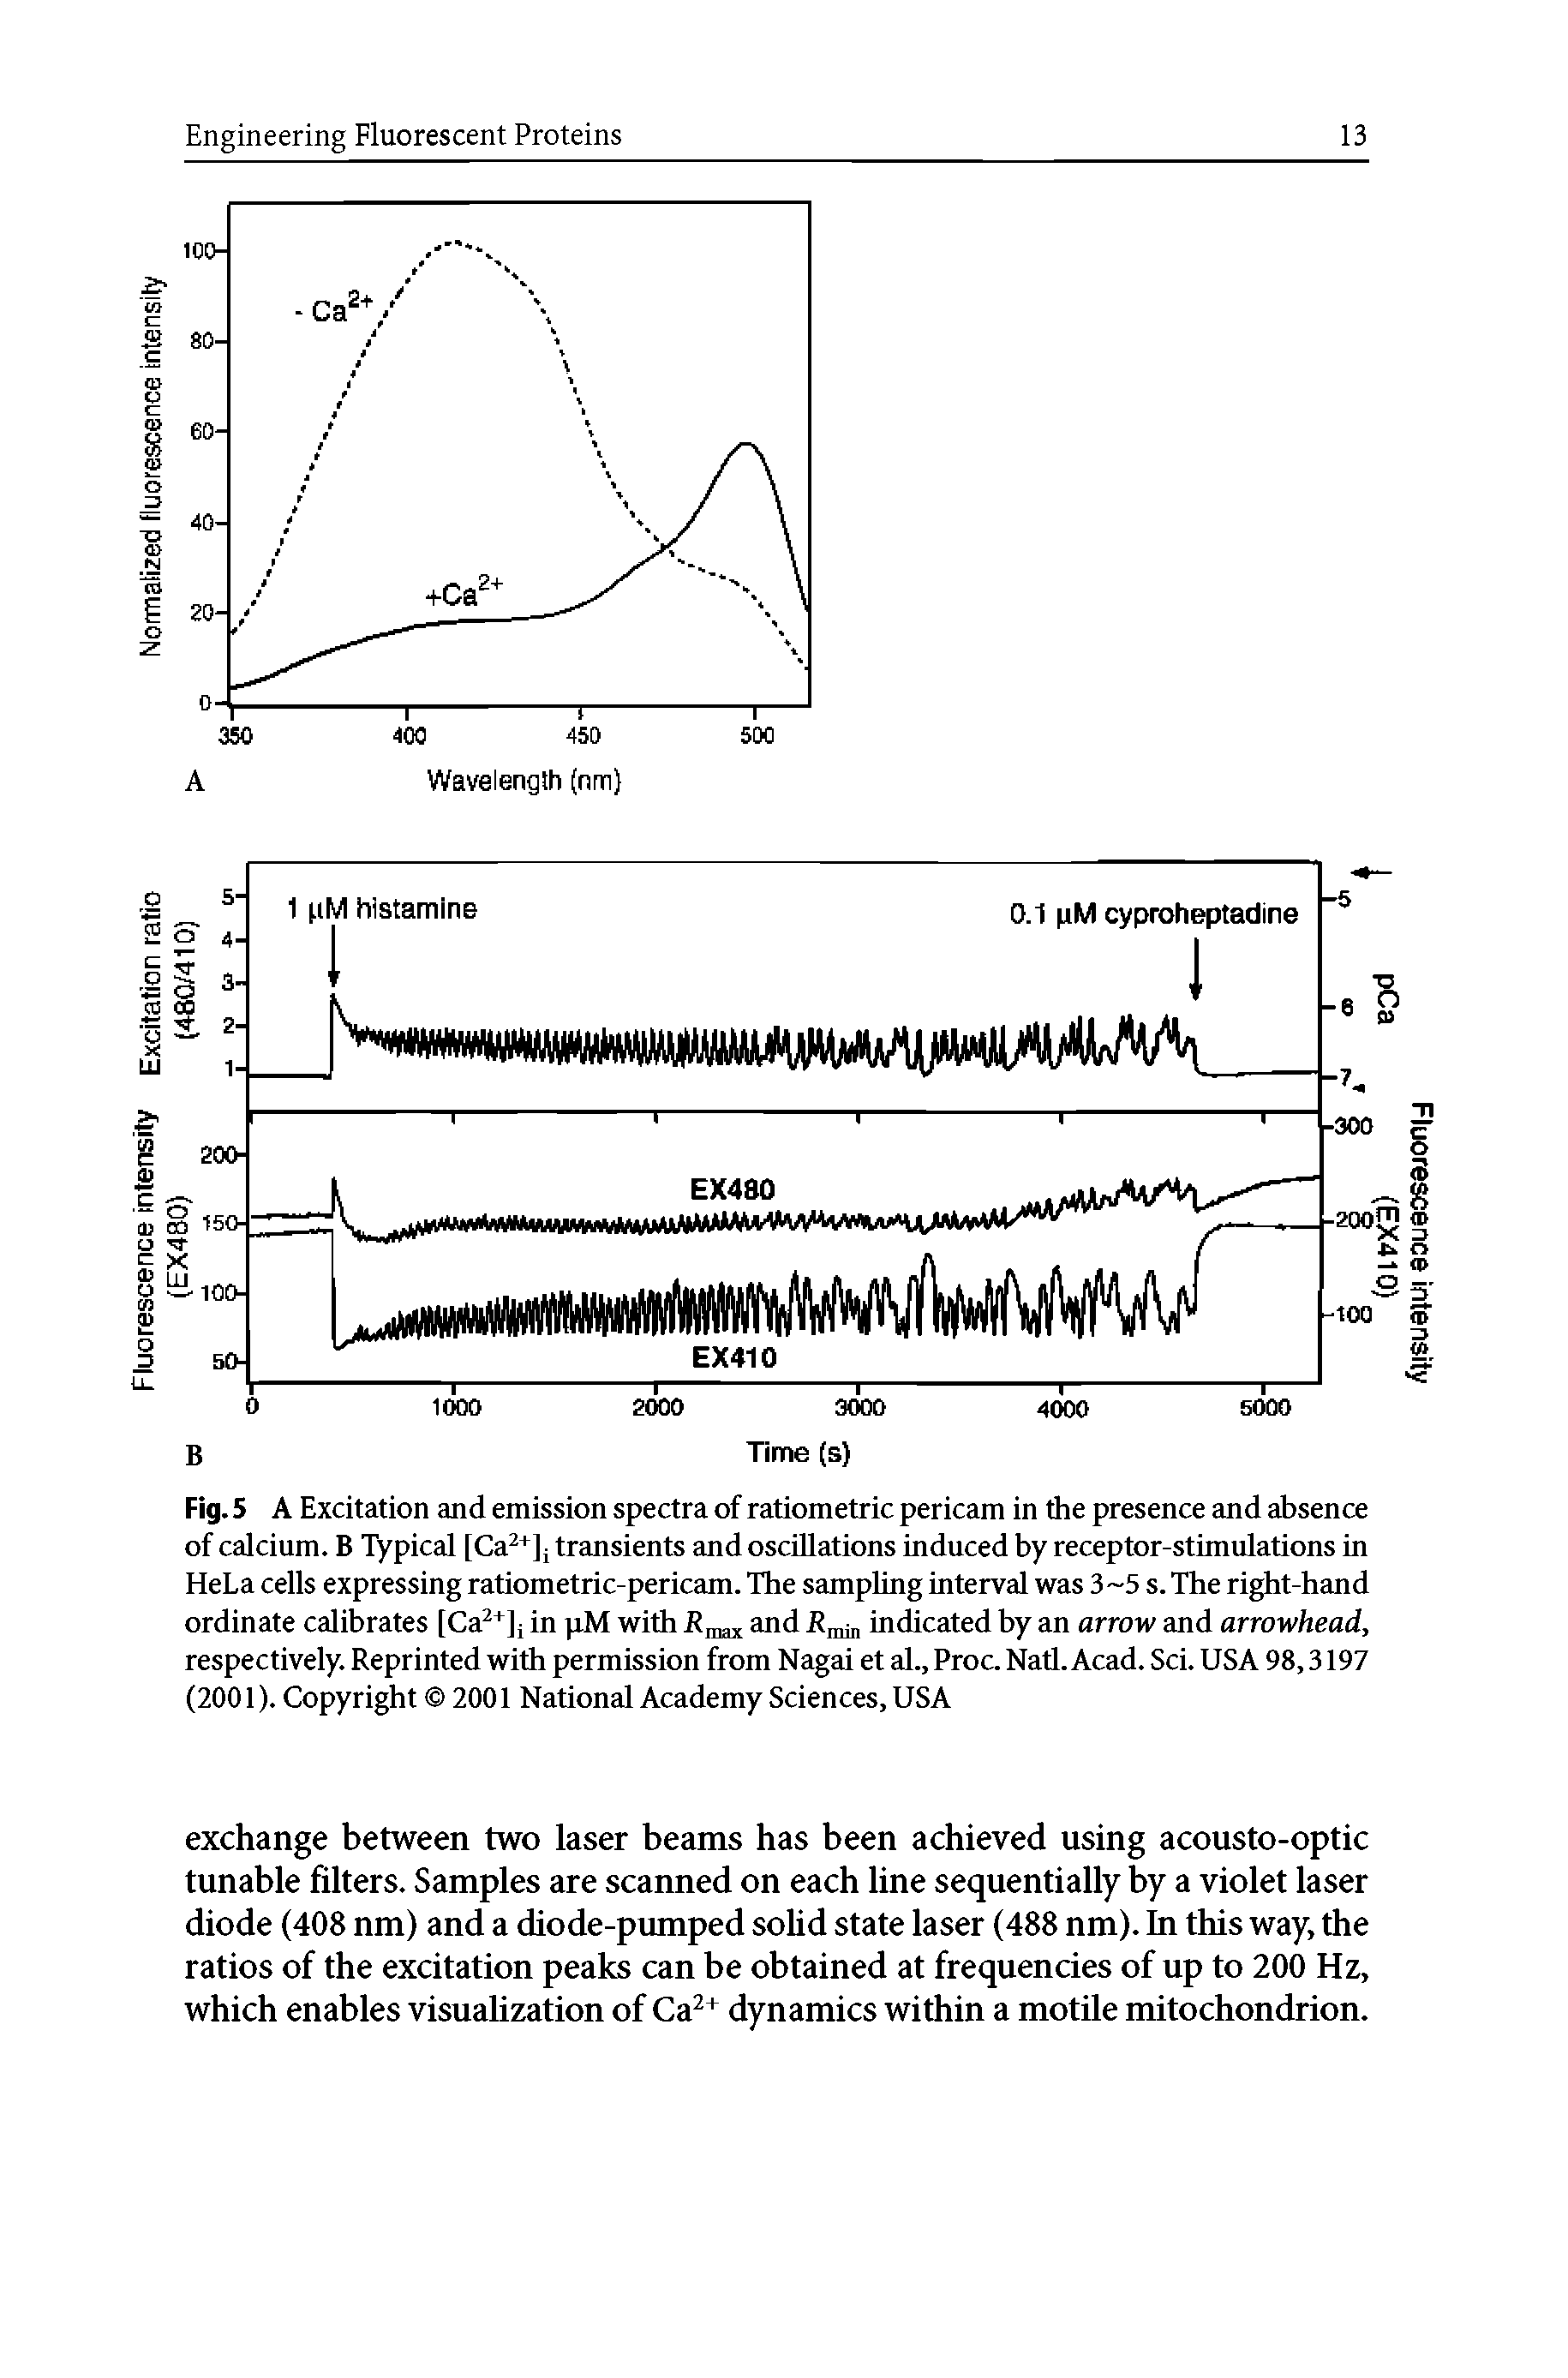 Fig. 5 A Excitation and emission spectra of ratiometric pericam in the presence and absence of calcium. B Typical [Ca +] transients and oscillations induced by receptor-stimulations in HeLa cells expressing ratiometric-pericam. The sampling interval was 3 5 s. The right-hand ordinate calibrates [Ca +] in pM with and l n indicated by an arrow and arrowhead, respectively. Reprinted with permission from Nagai et al., Proc. Natl. Acad. Sci. USA 98,3197 (2001). Copyright 2001 National Academy Sciences, USA...